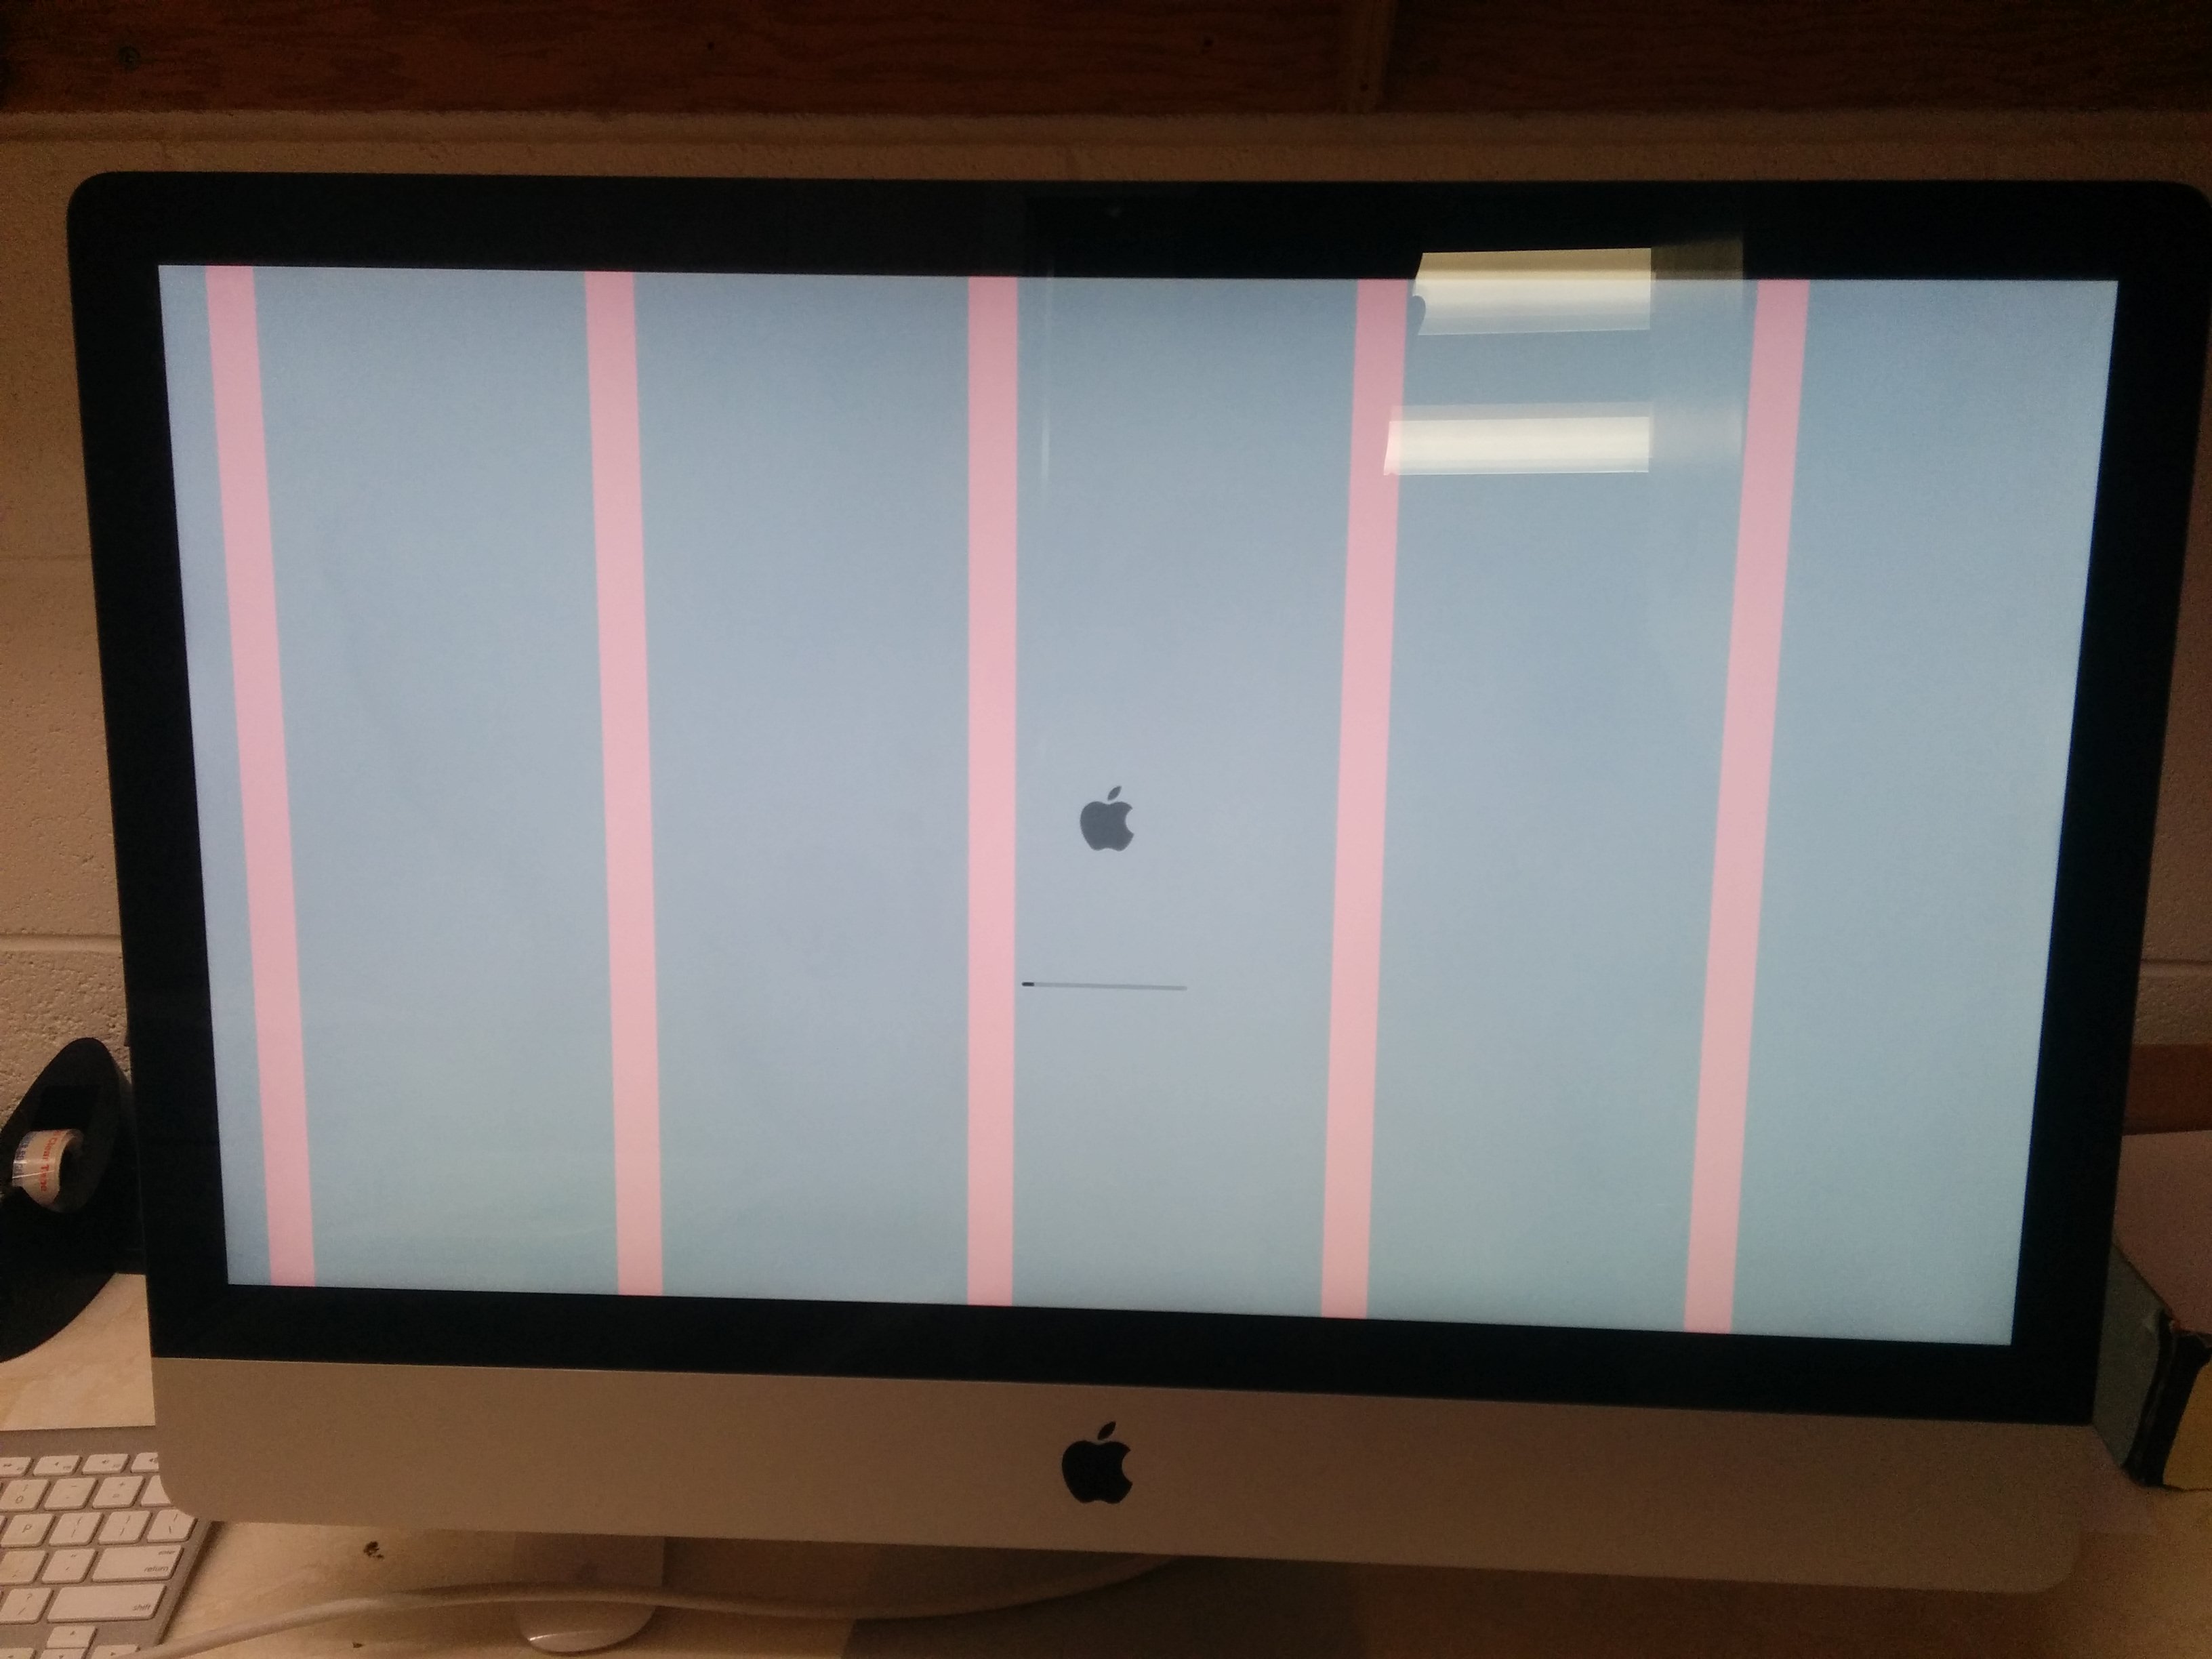 Causes for lines on your iMac display